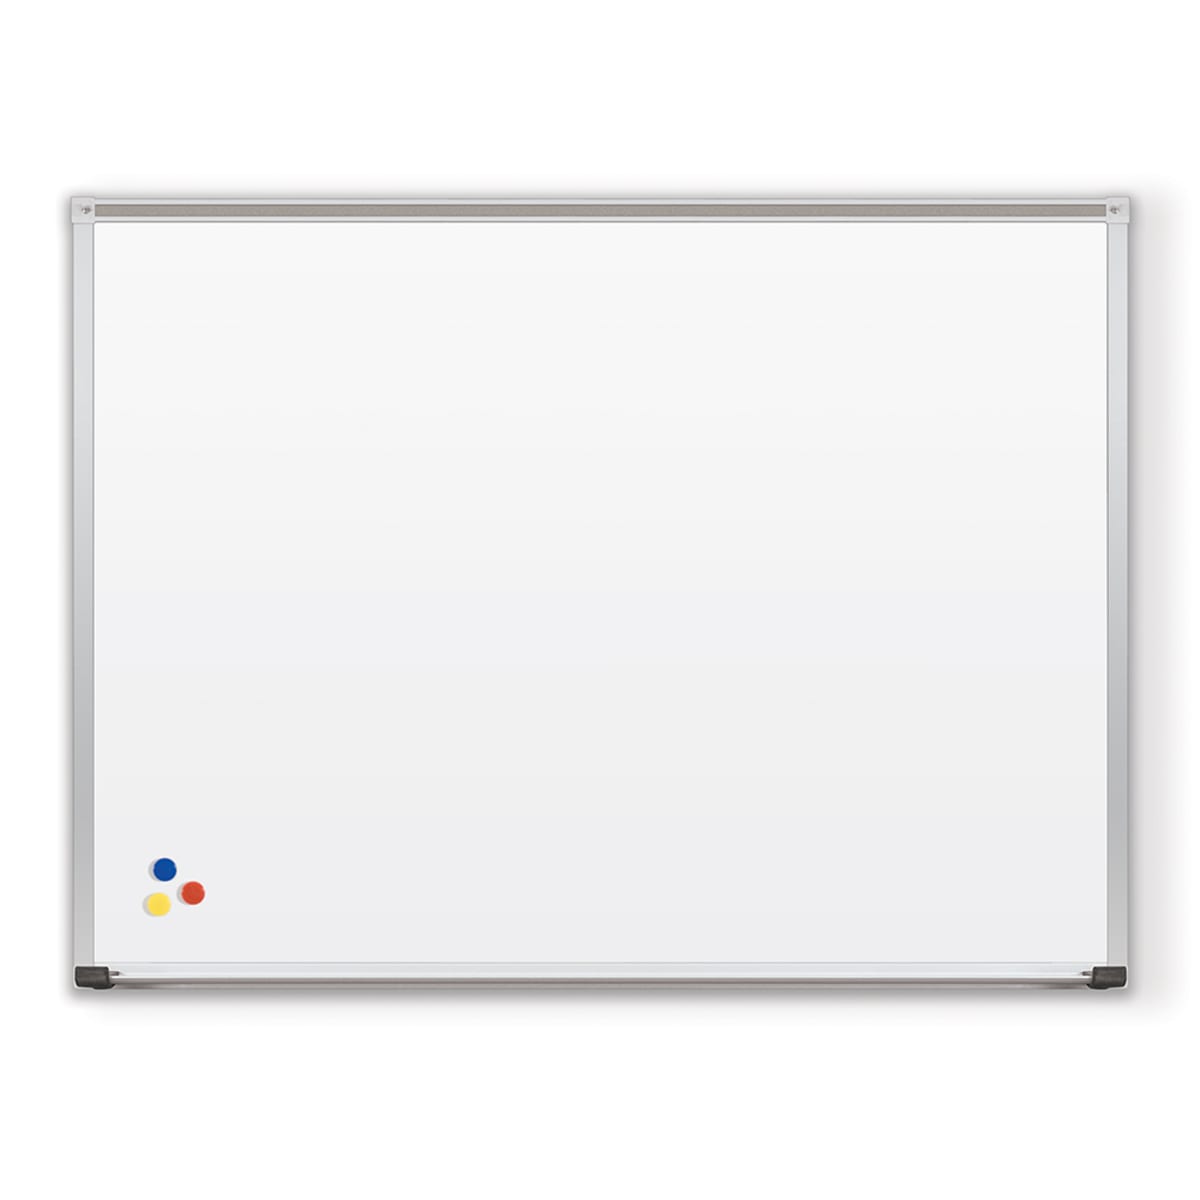 Mooreco Porcelain Markerboard with Deluxe Aluminum Trim - 3'H x 4'W (Mooreco 202AC) - SchoolOutlet